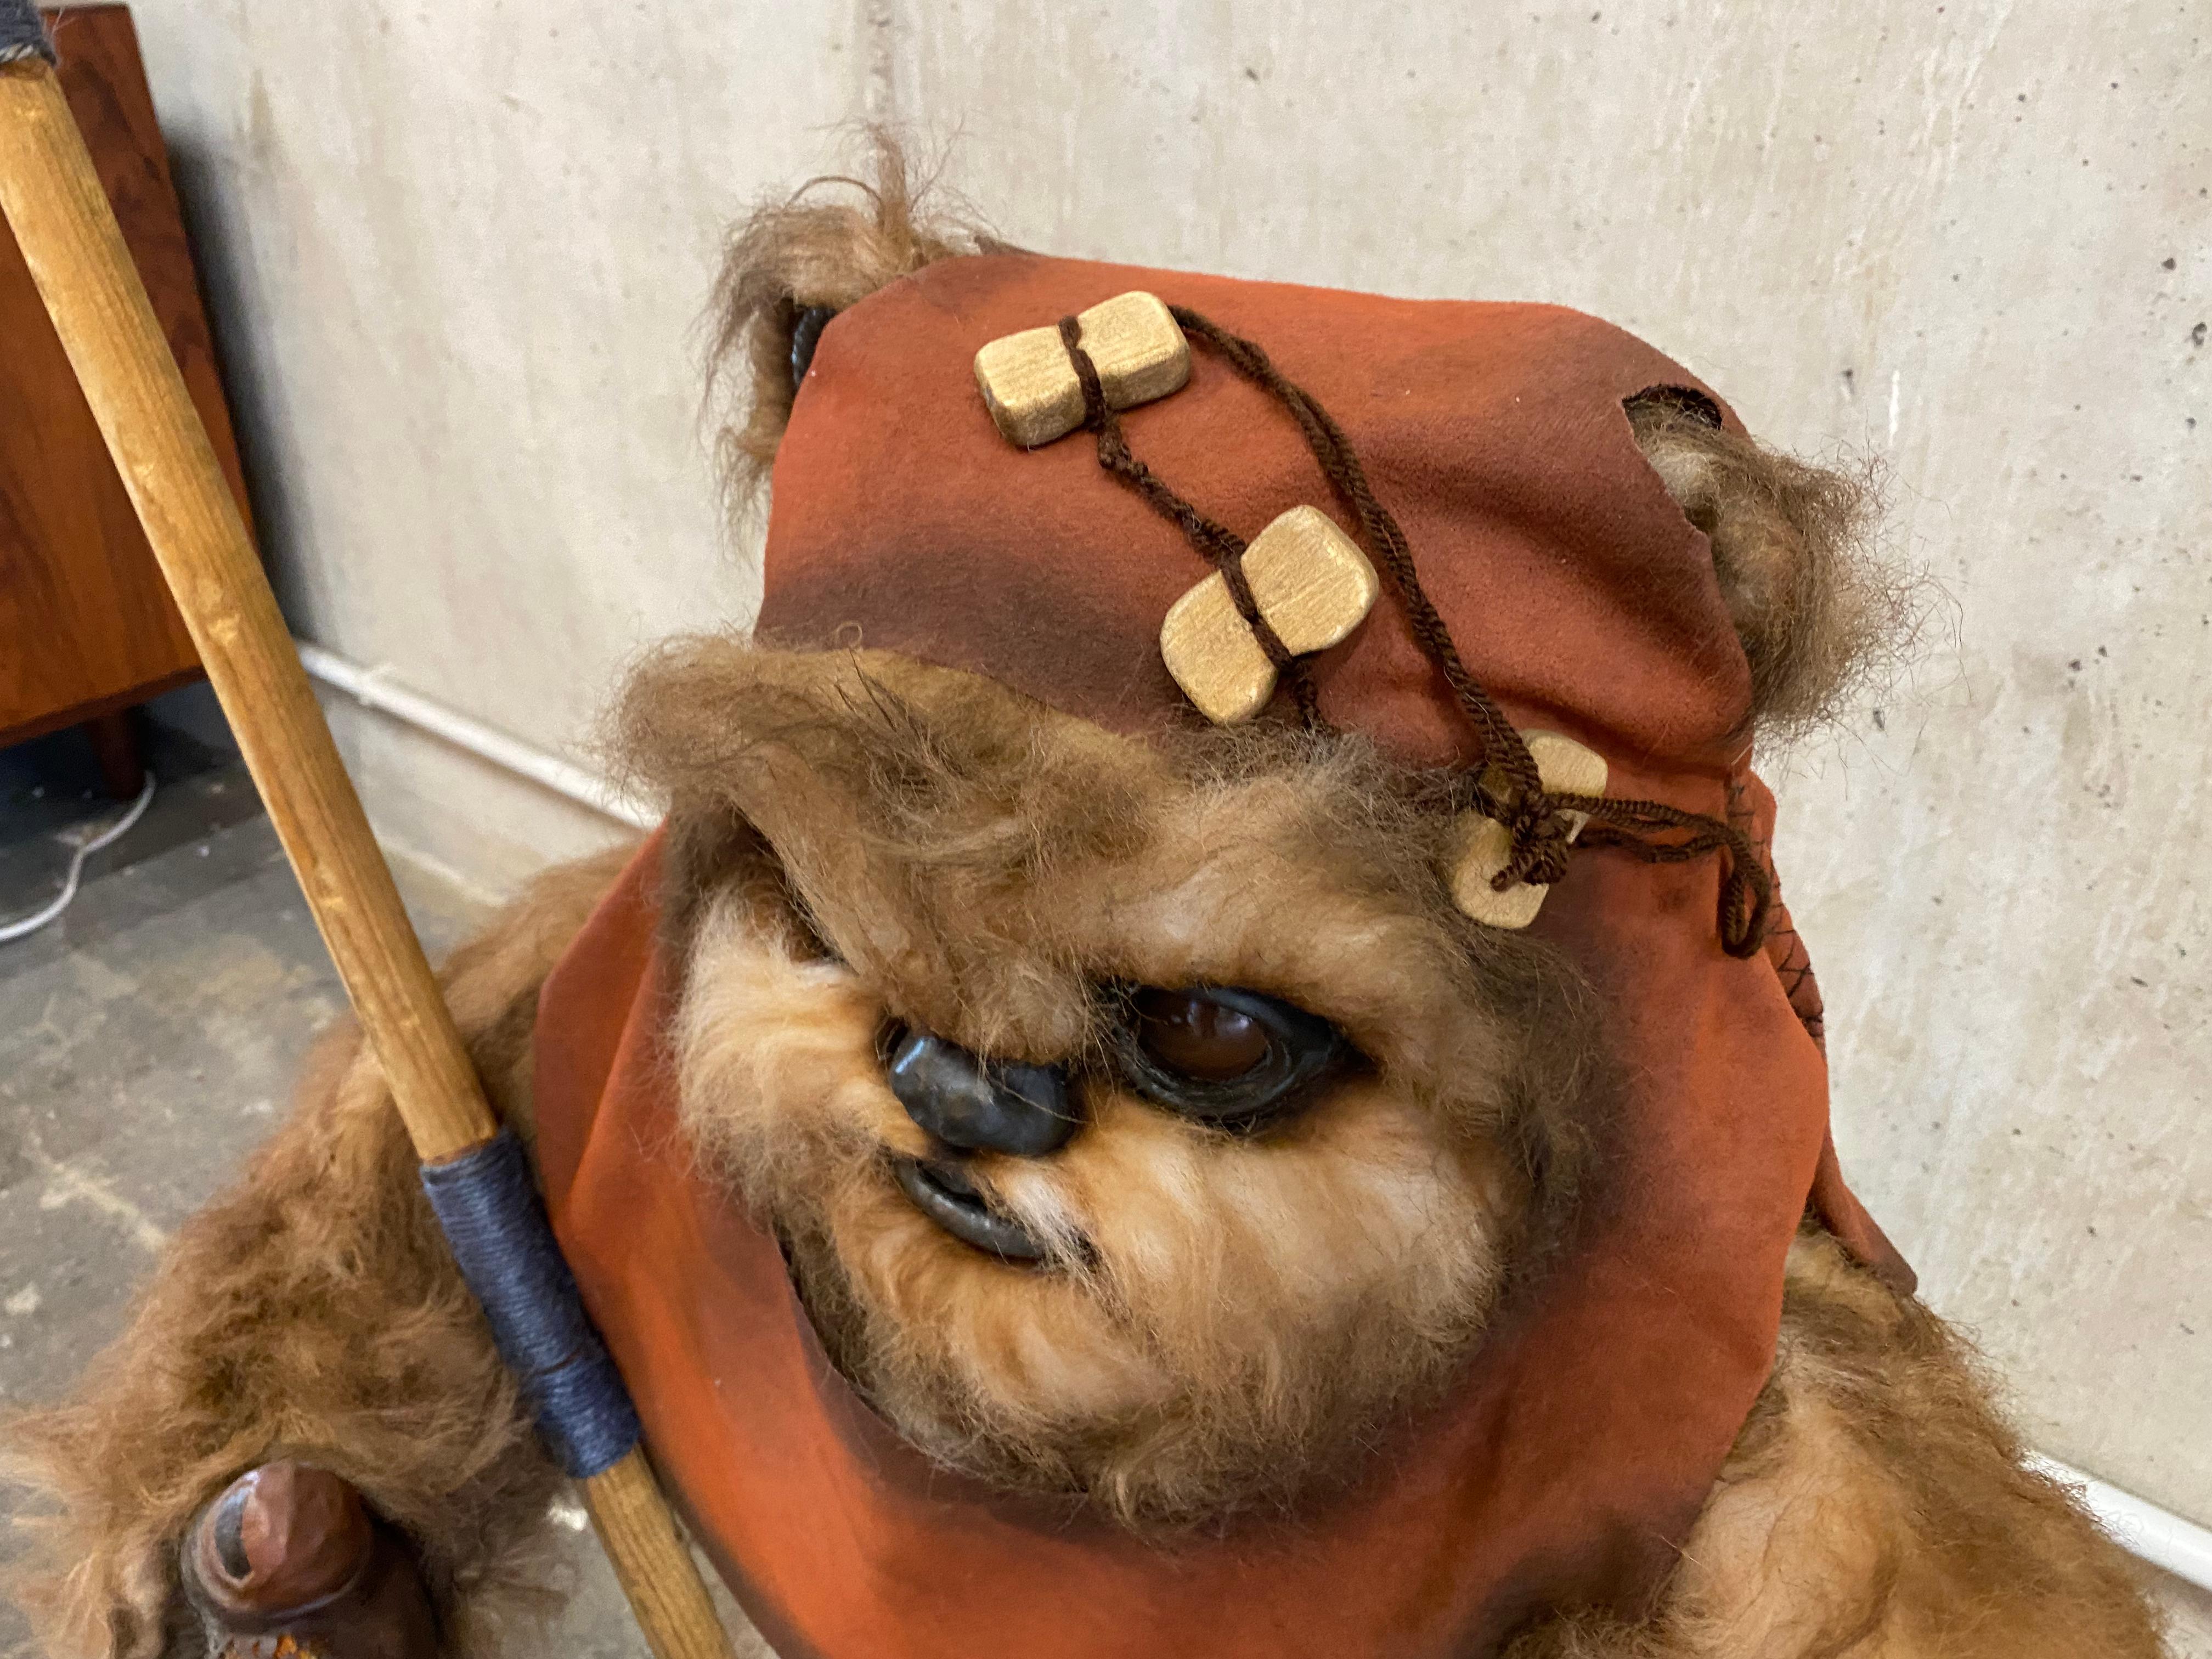 American Life Size Wicket Ewok Figure, Edition of 50 Pieces, Star Wars Photo Requisite